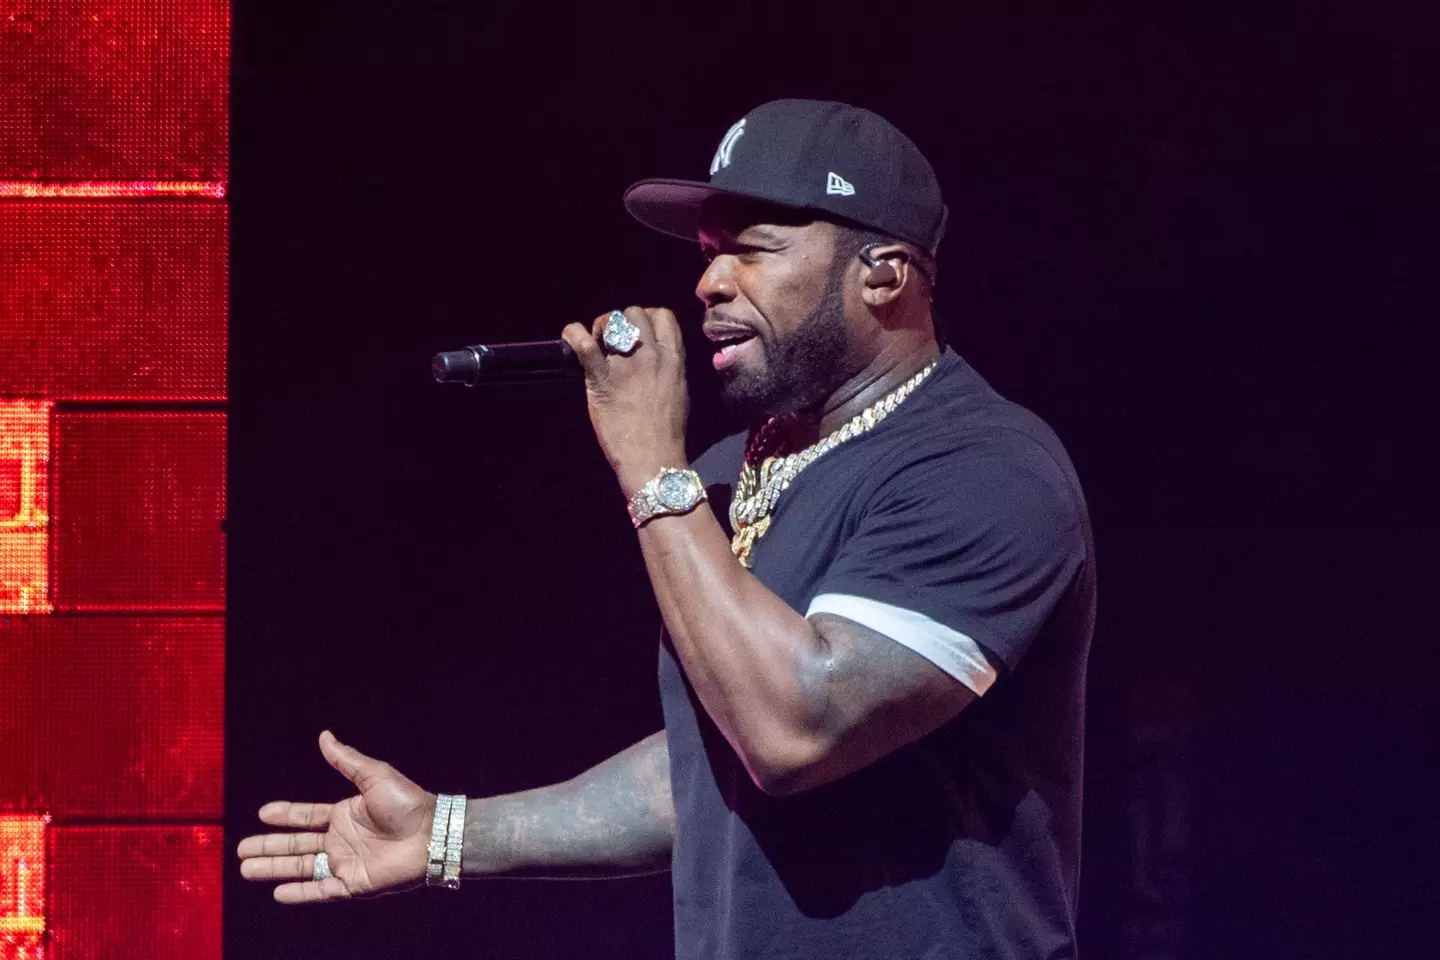 50 Cent blew $470 million and filed for bankruptcy.